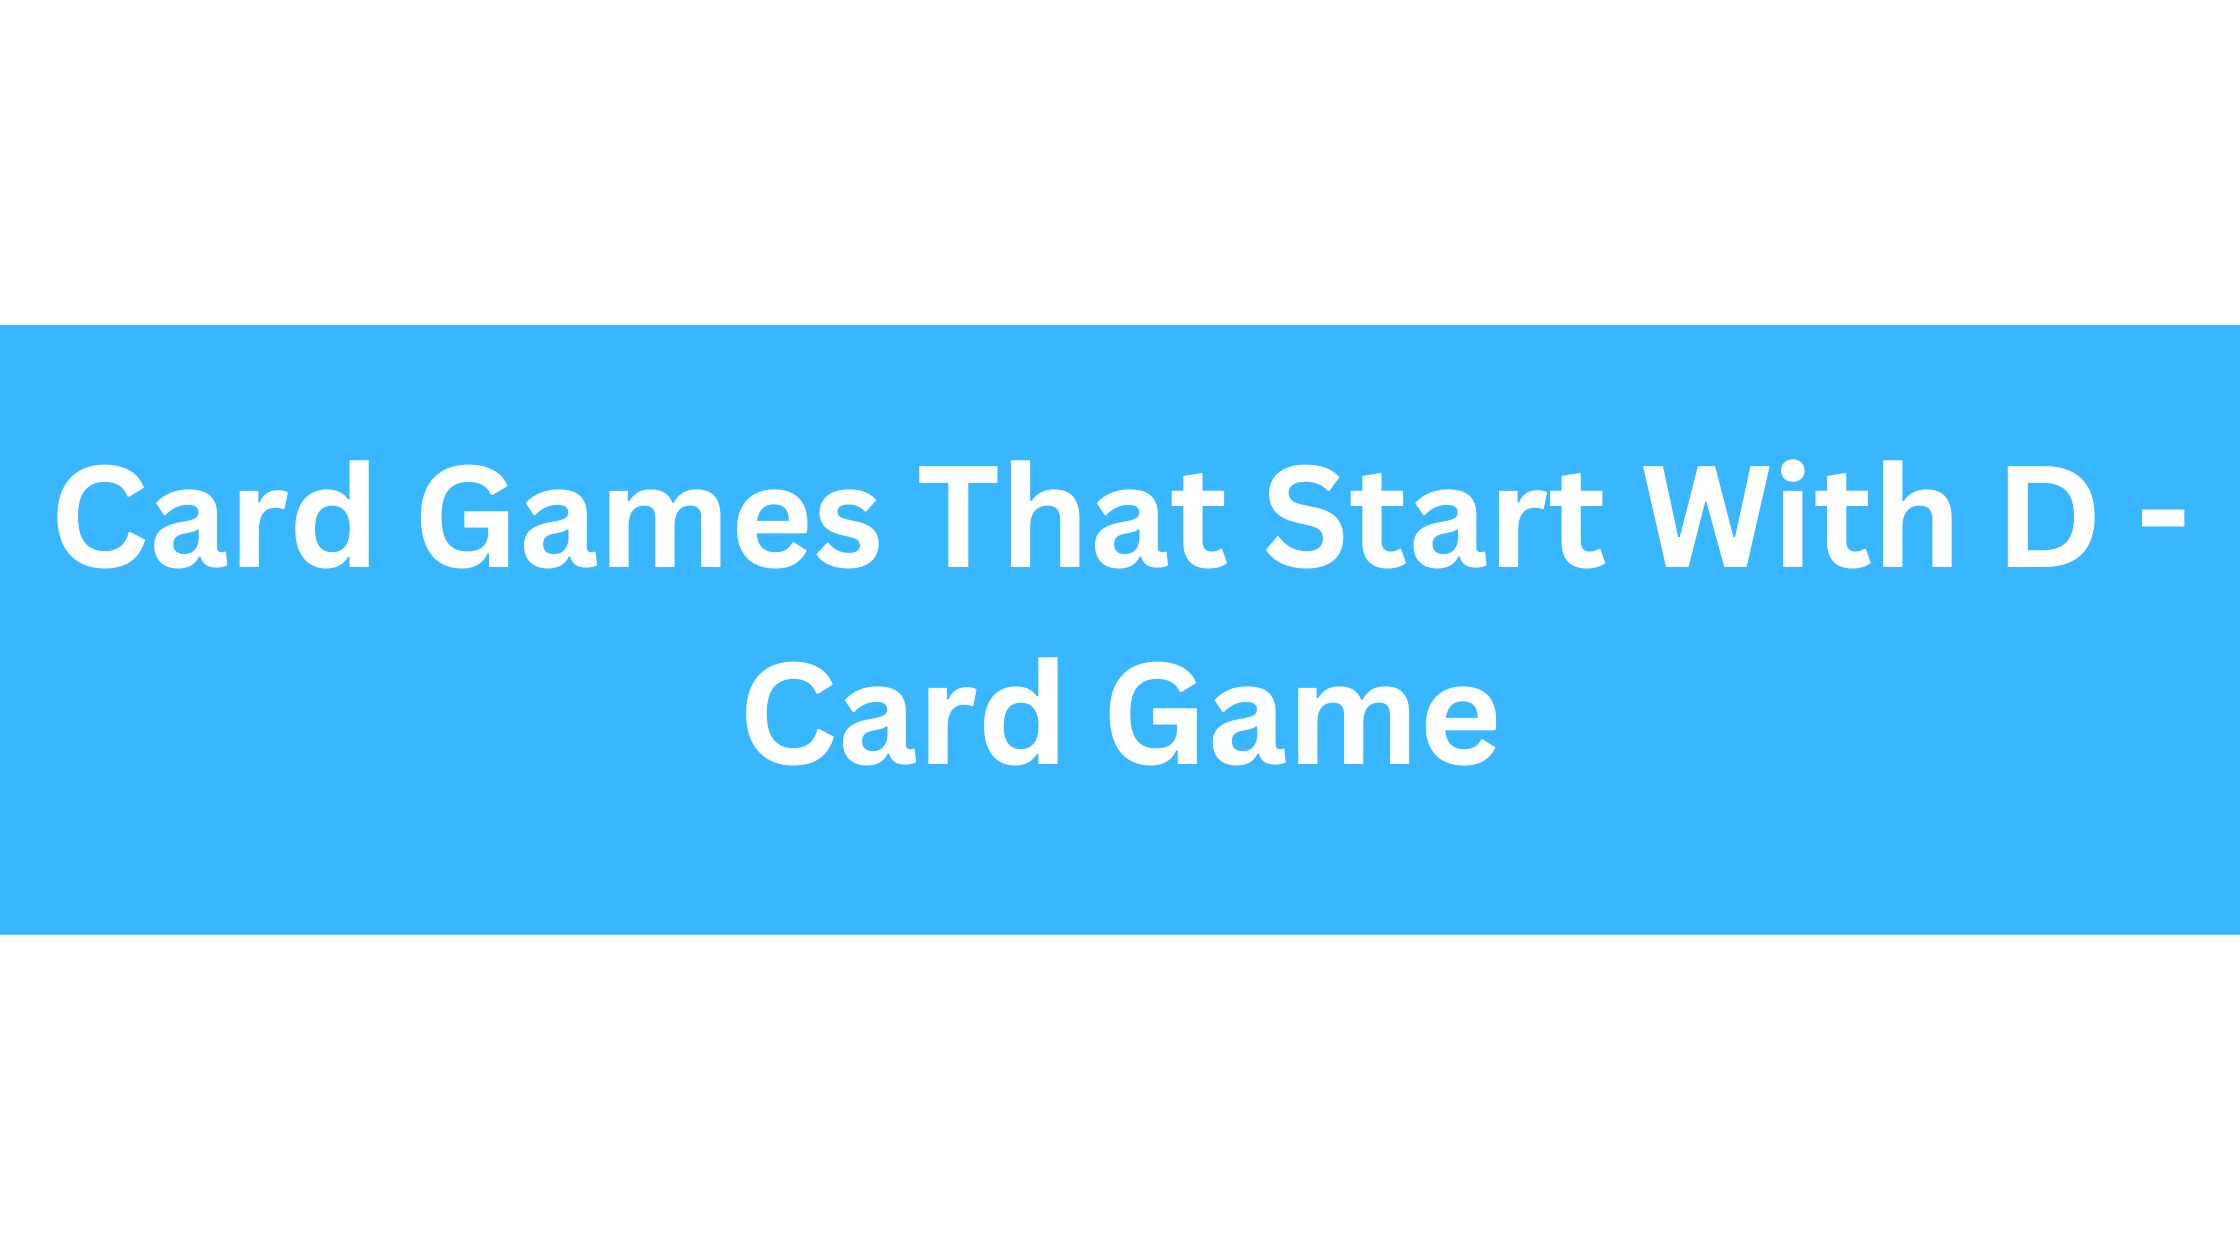 Card Games That Start With D